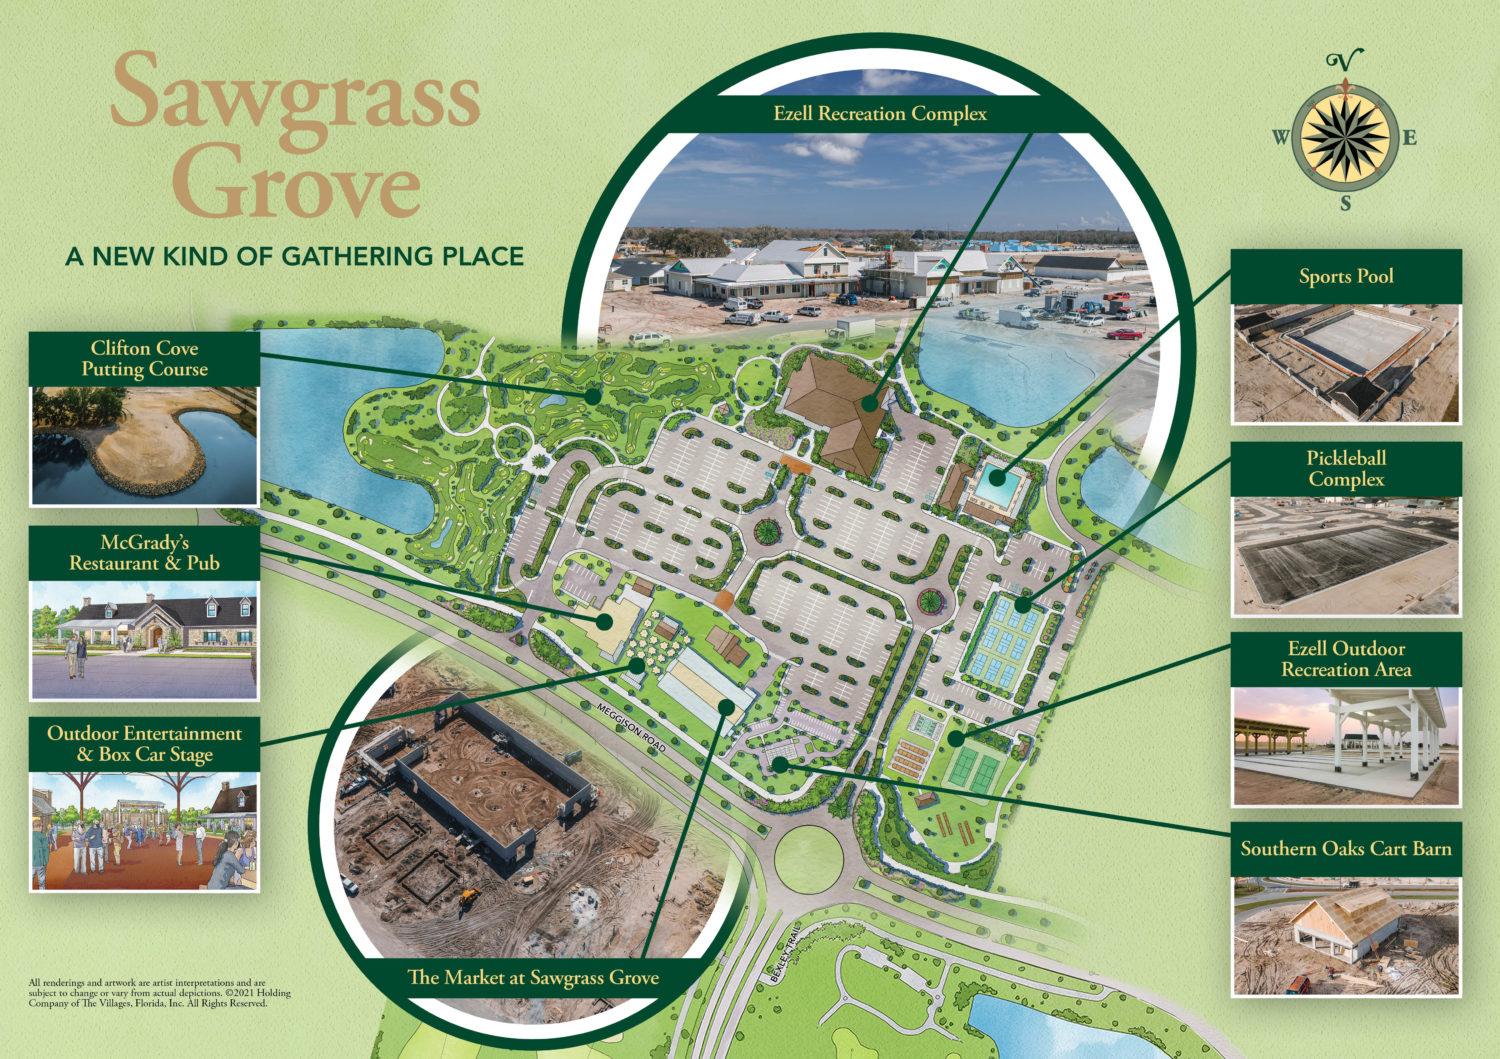 Sawgrass Grove: A New Kind Of Gathering Place